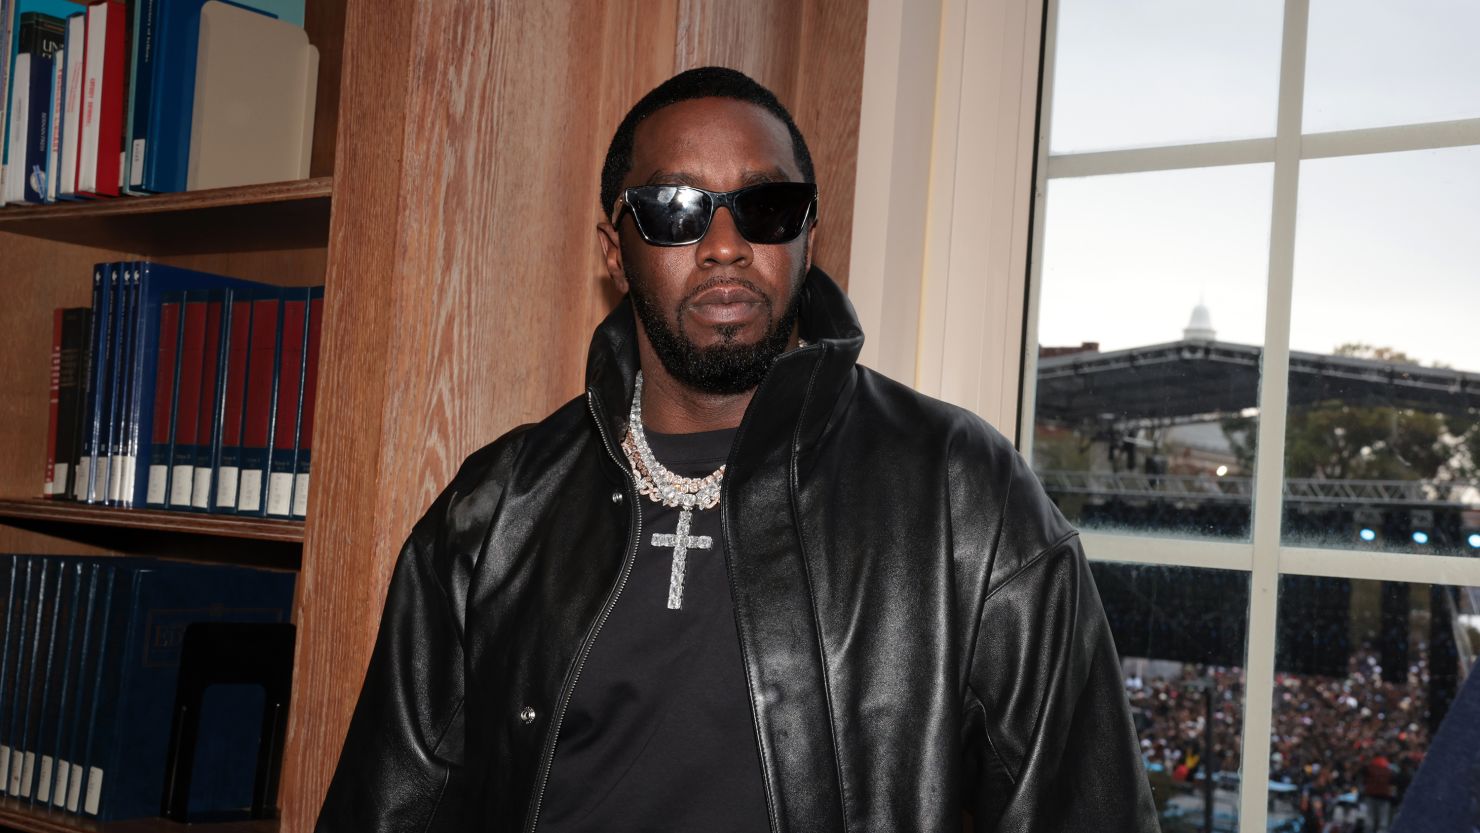 WASHINGTON, DC - OCTOBER 20: Sean "Diddy" Combs attends  Sean "Diddy" Combs Fulfills $1 Million Pledge To Howard University At Howard Homecoming -- Yardfest at Howard University on October 20, 2023 in Washington, DC. (Photo by Shareif Ziyadat/Getty Images for Sean "Diddy" Combs)